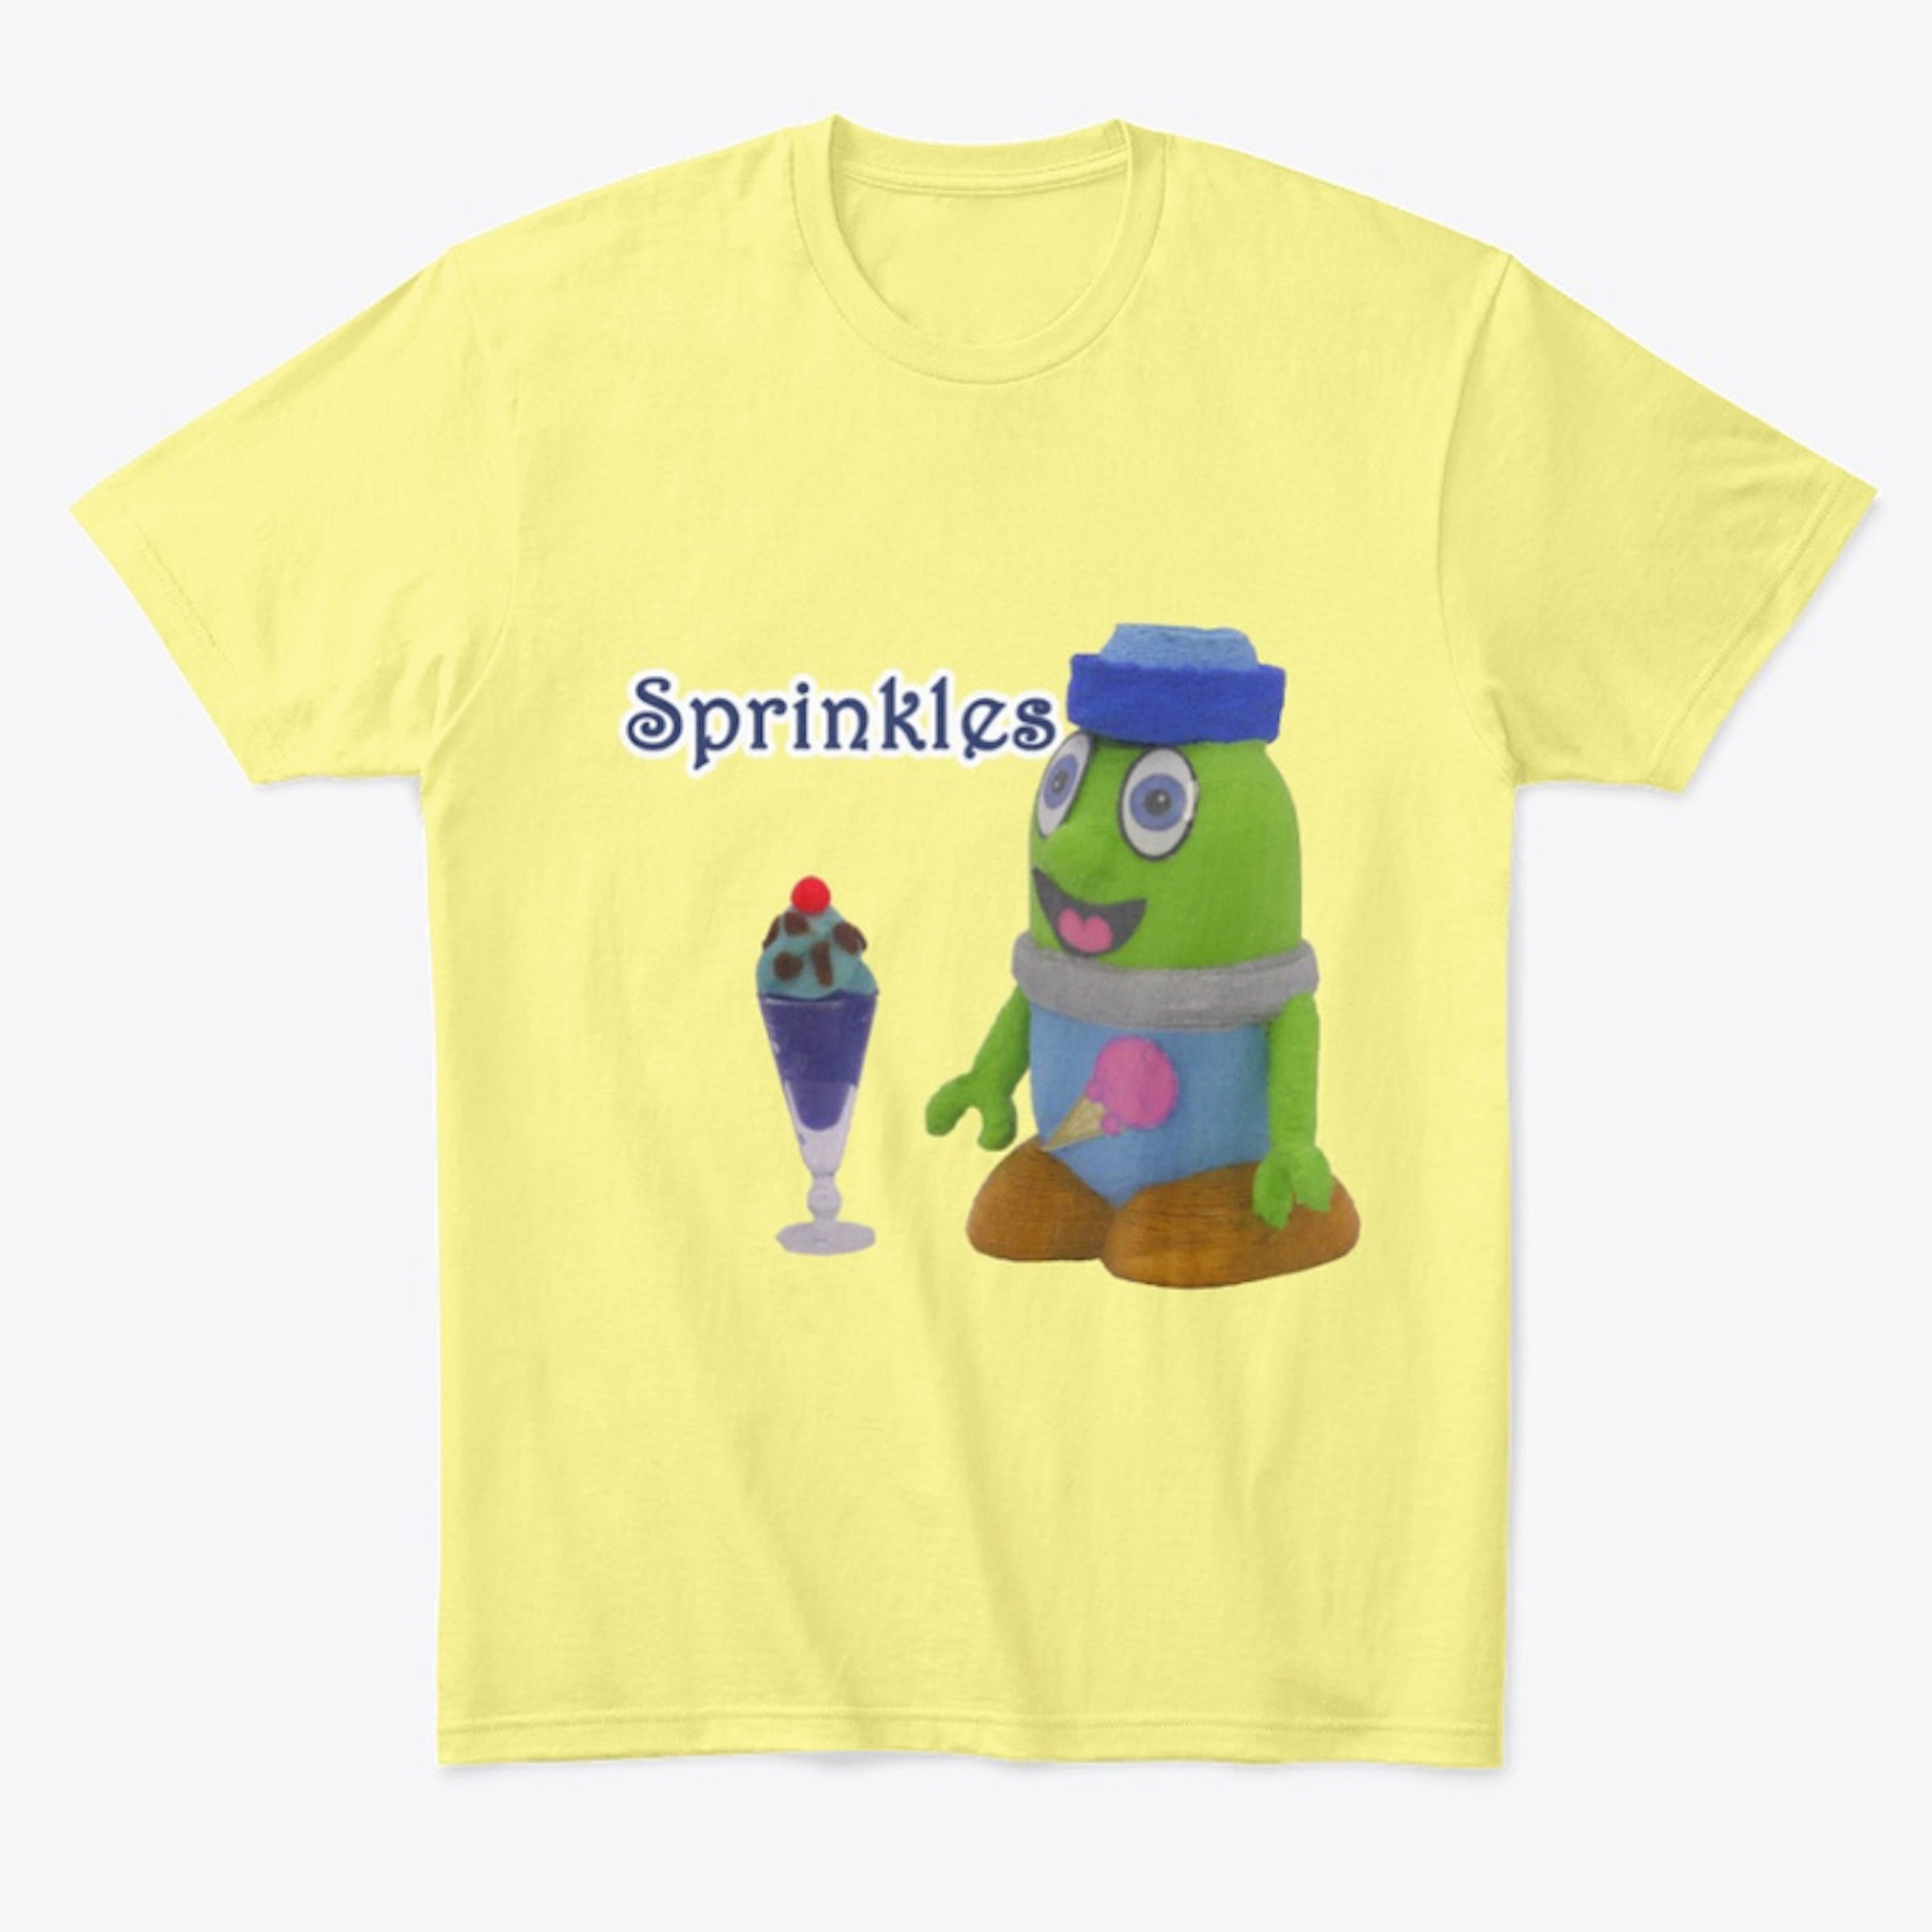 Comfort T-Shirt with Sprinkles